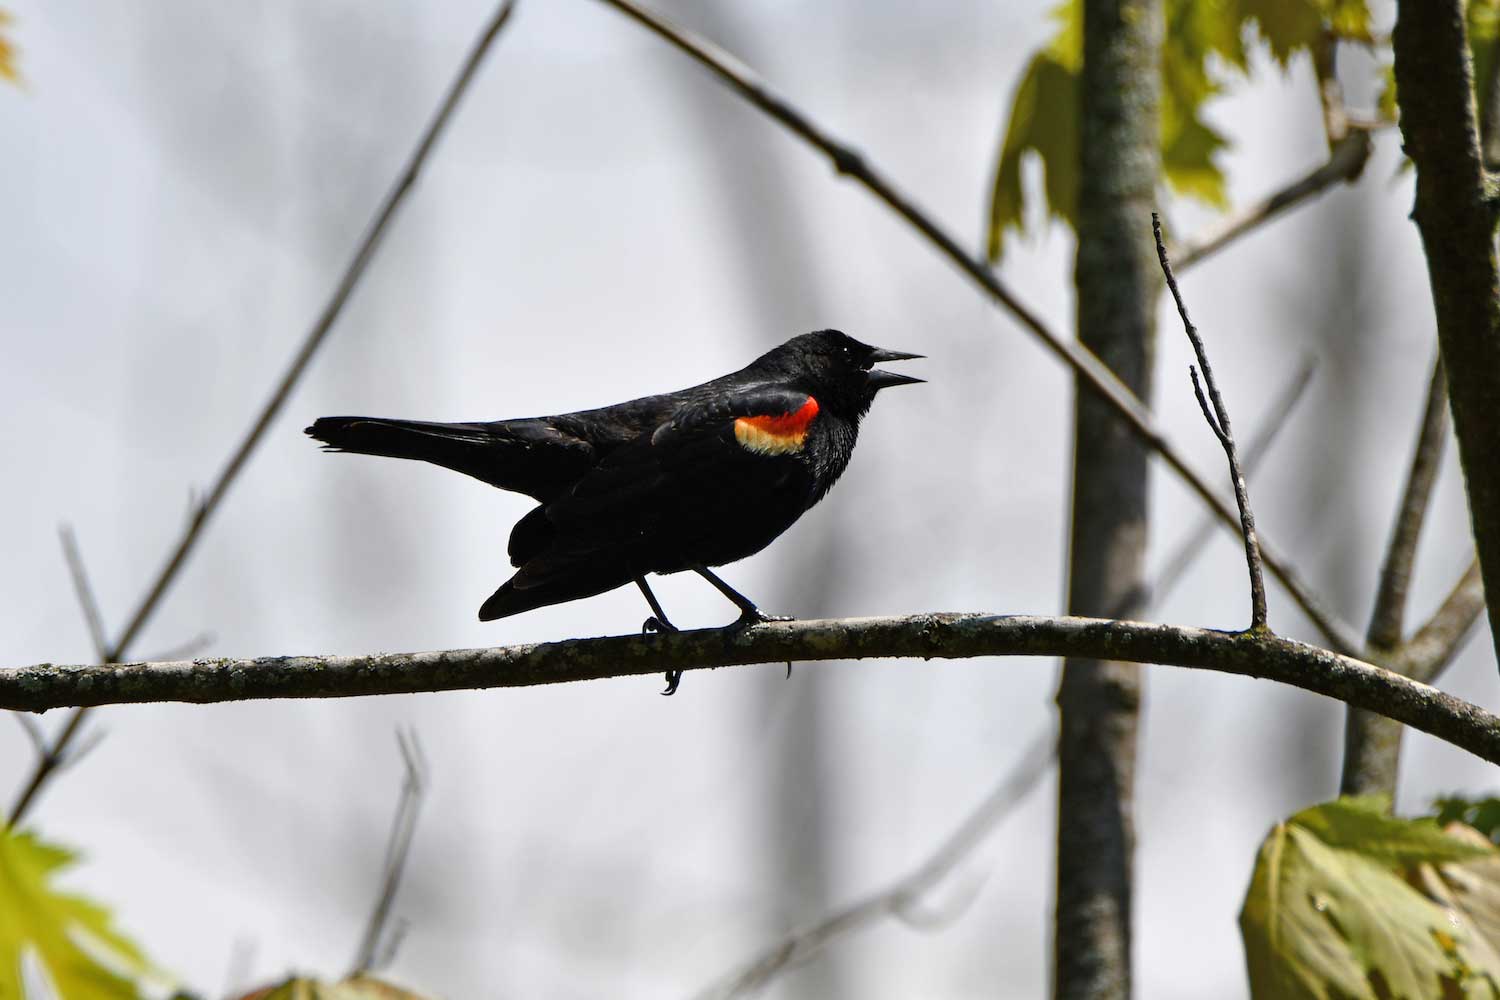 A red-winged blackbird on a tree branch.